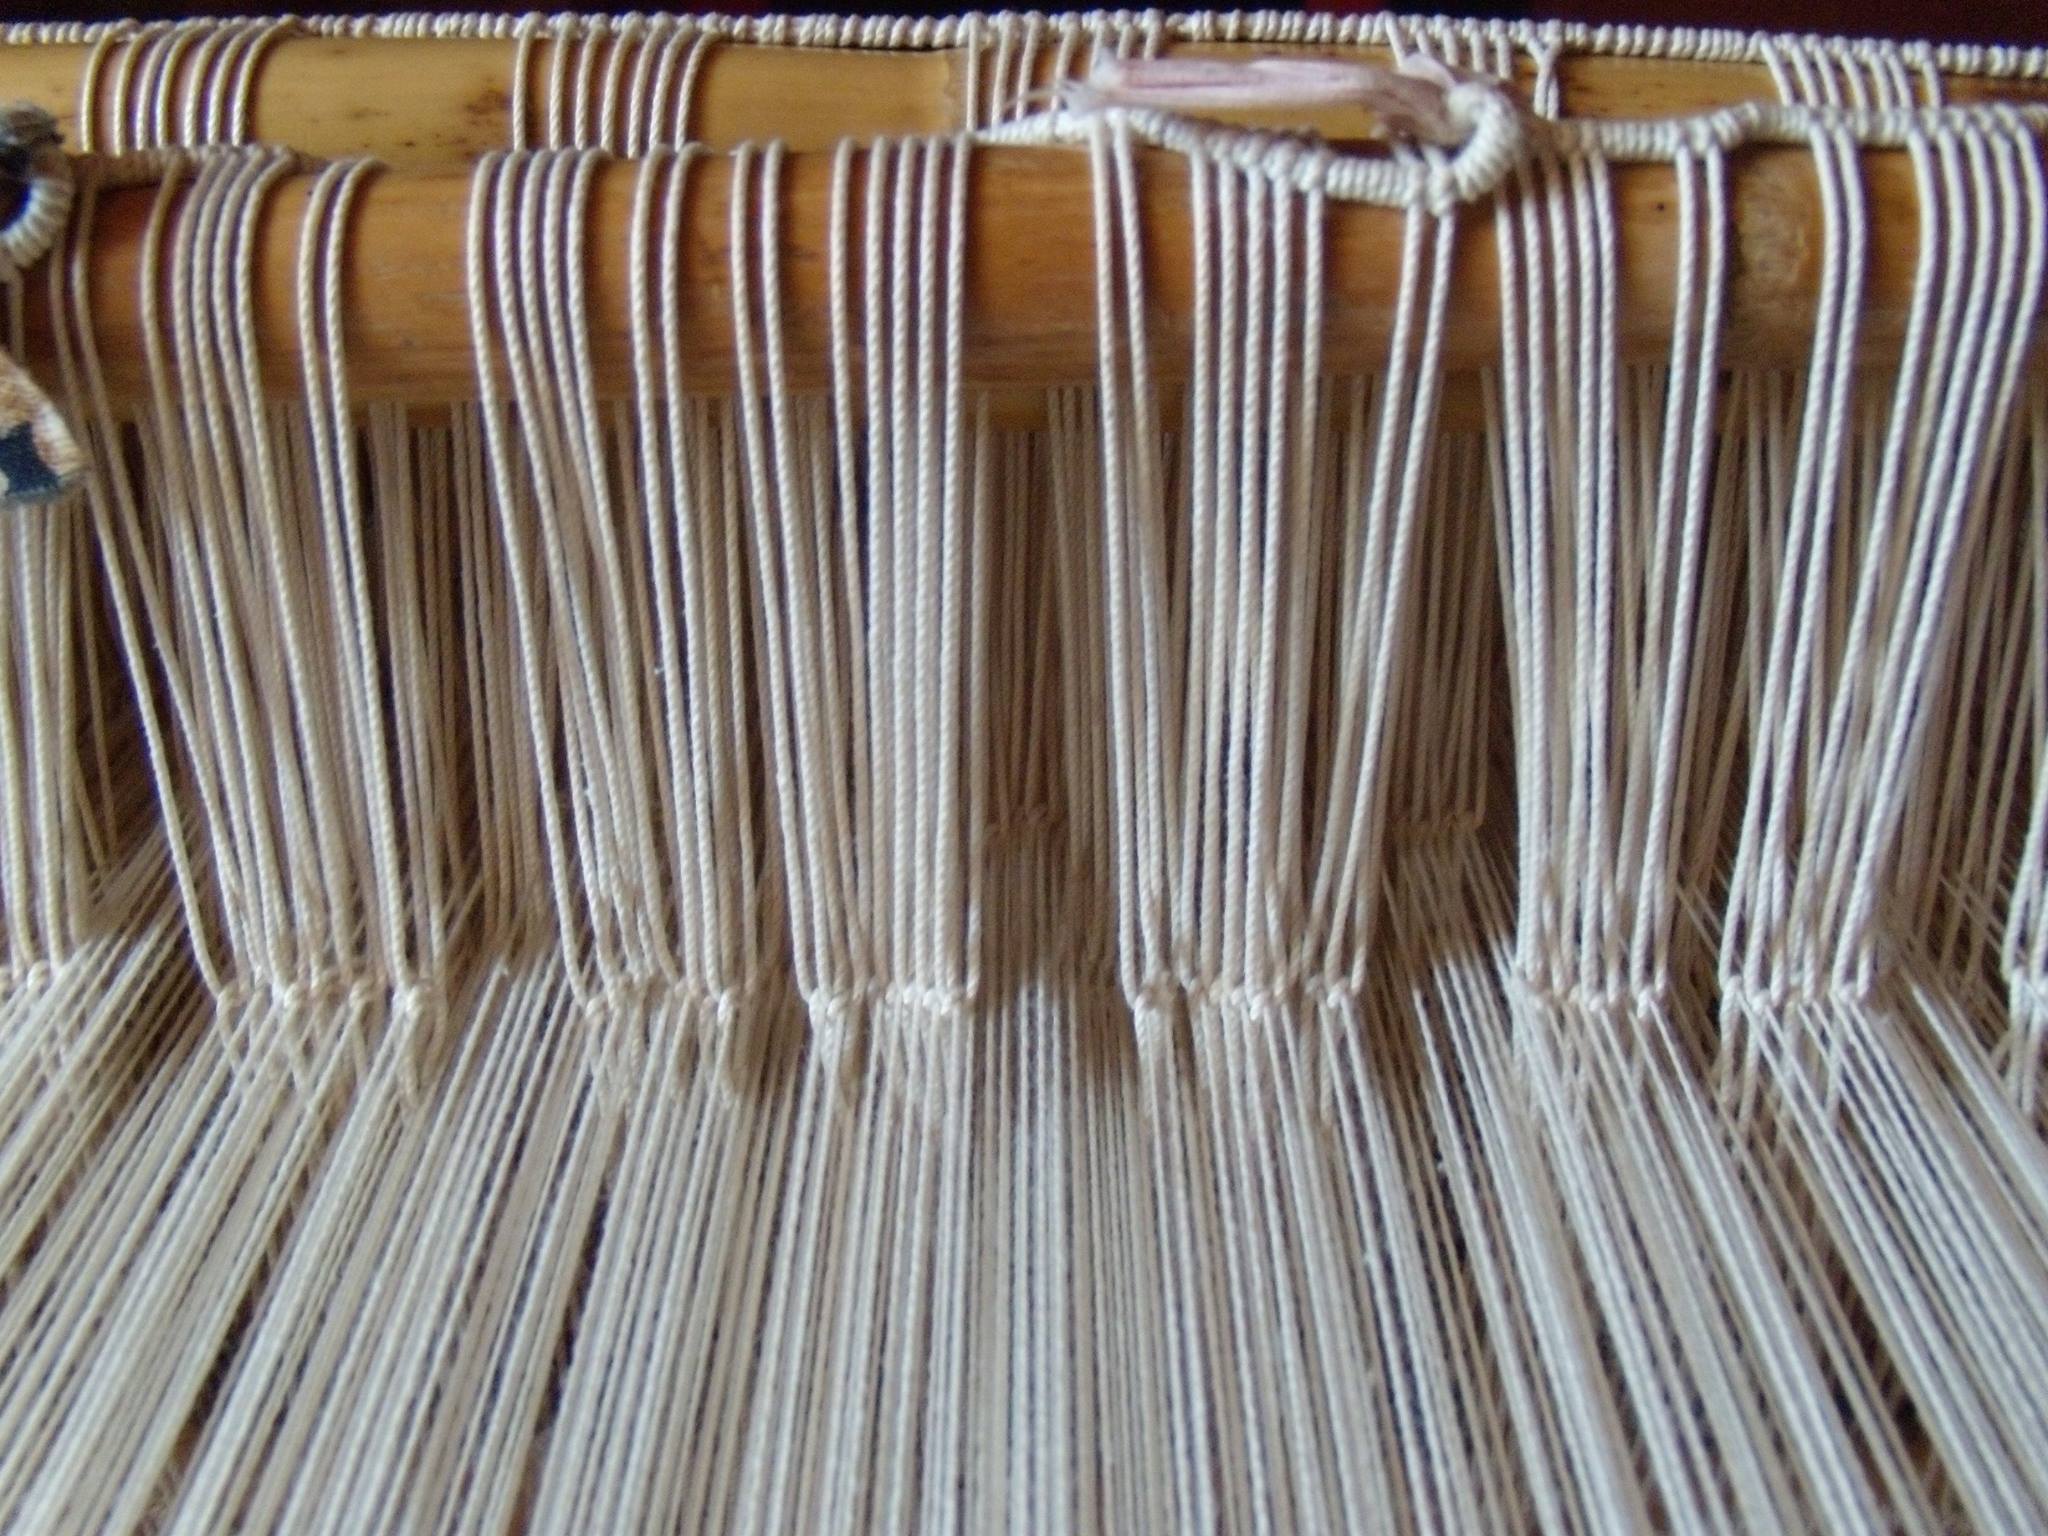 Lussu House, conversing with the loom